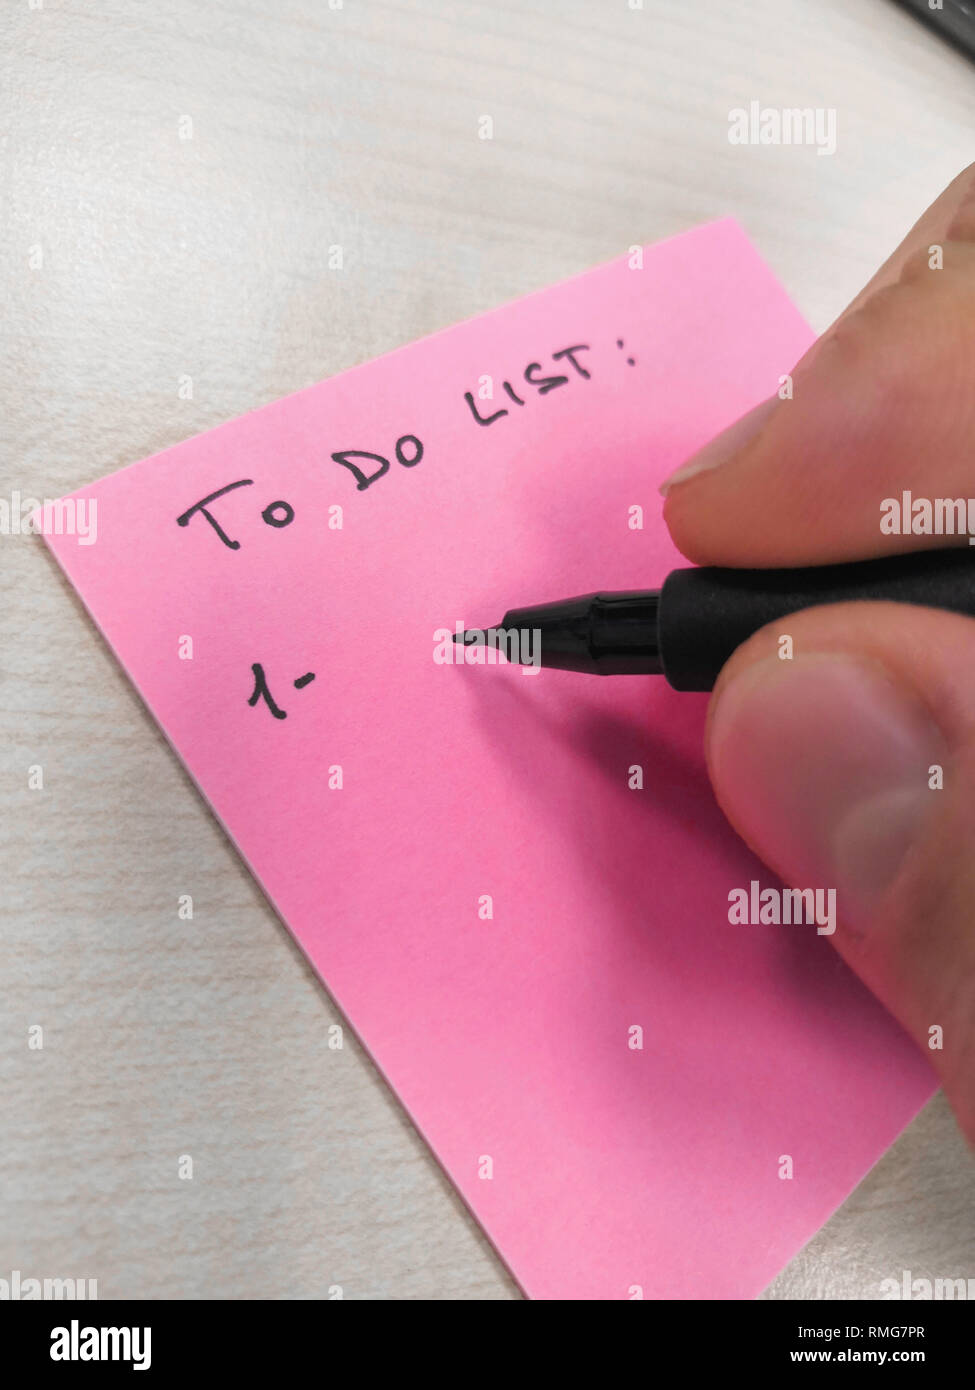 hand writing with pen on a sheet of paper post-it Stock Photo